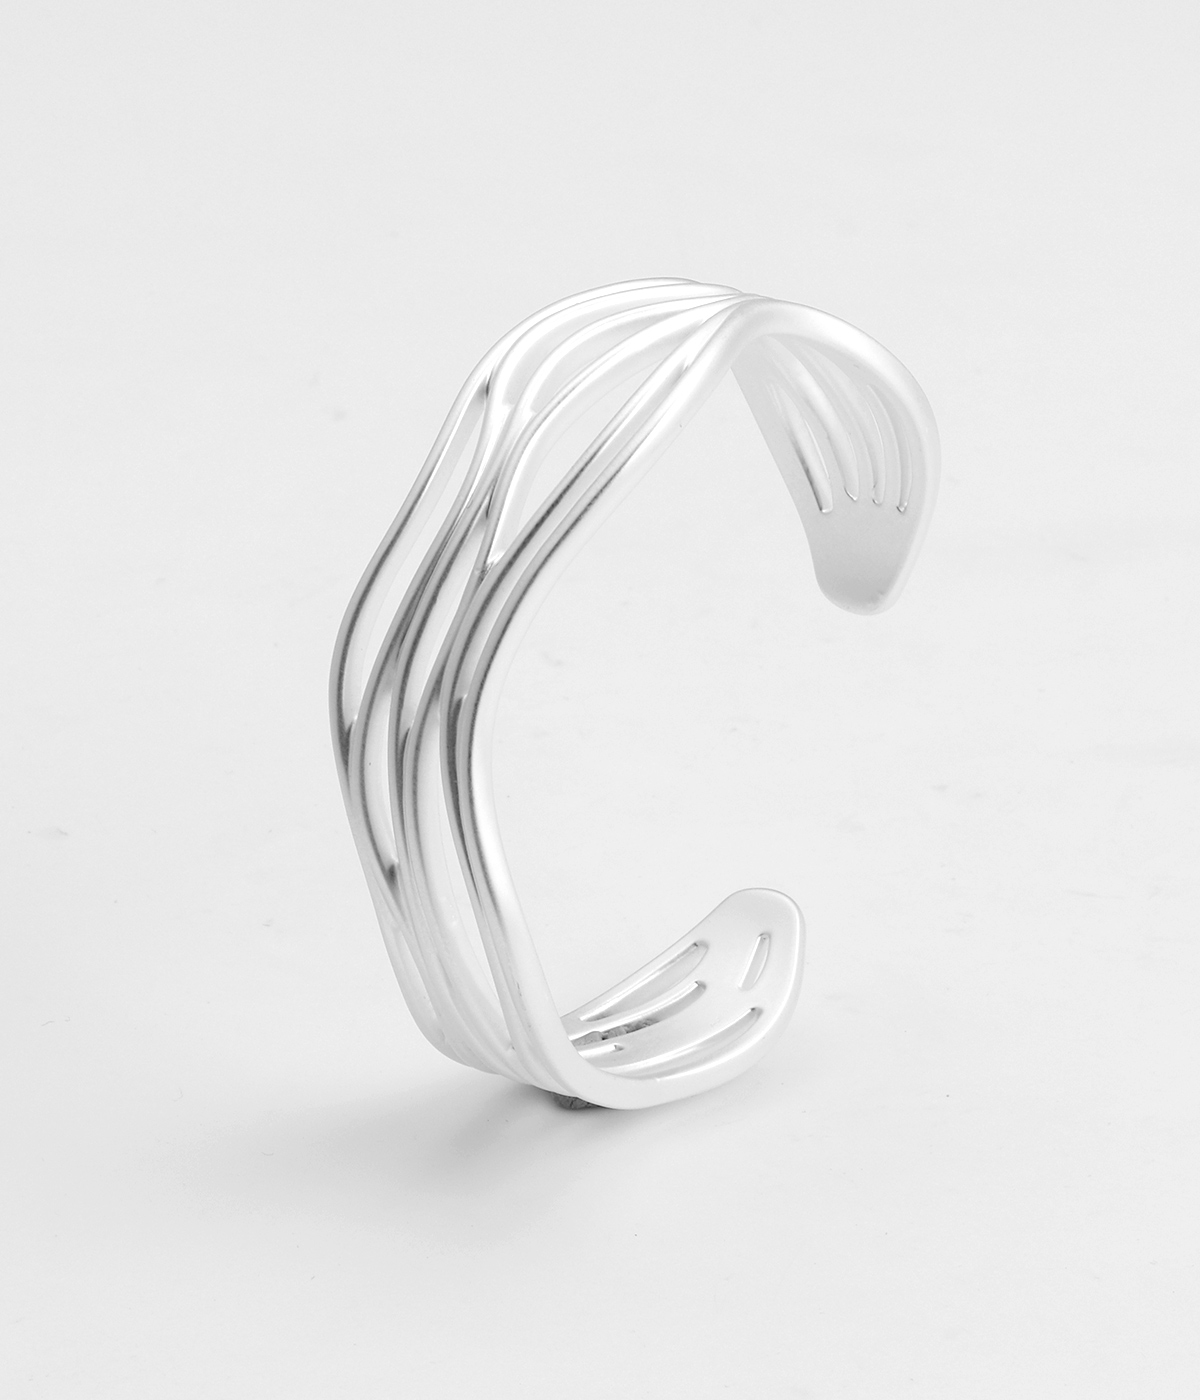 Wave Bangle by Vernon Wilson of Panama Bay Jewelers | vw-35 -latest BRACELET,Bangles And Cuffs design 2021